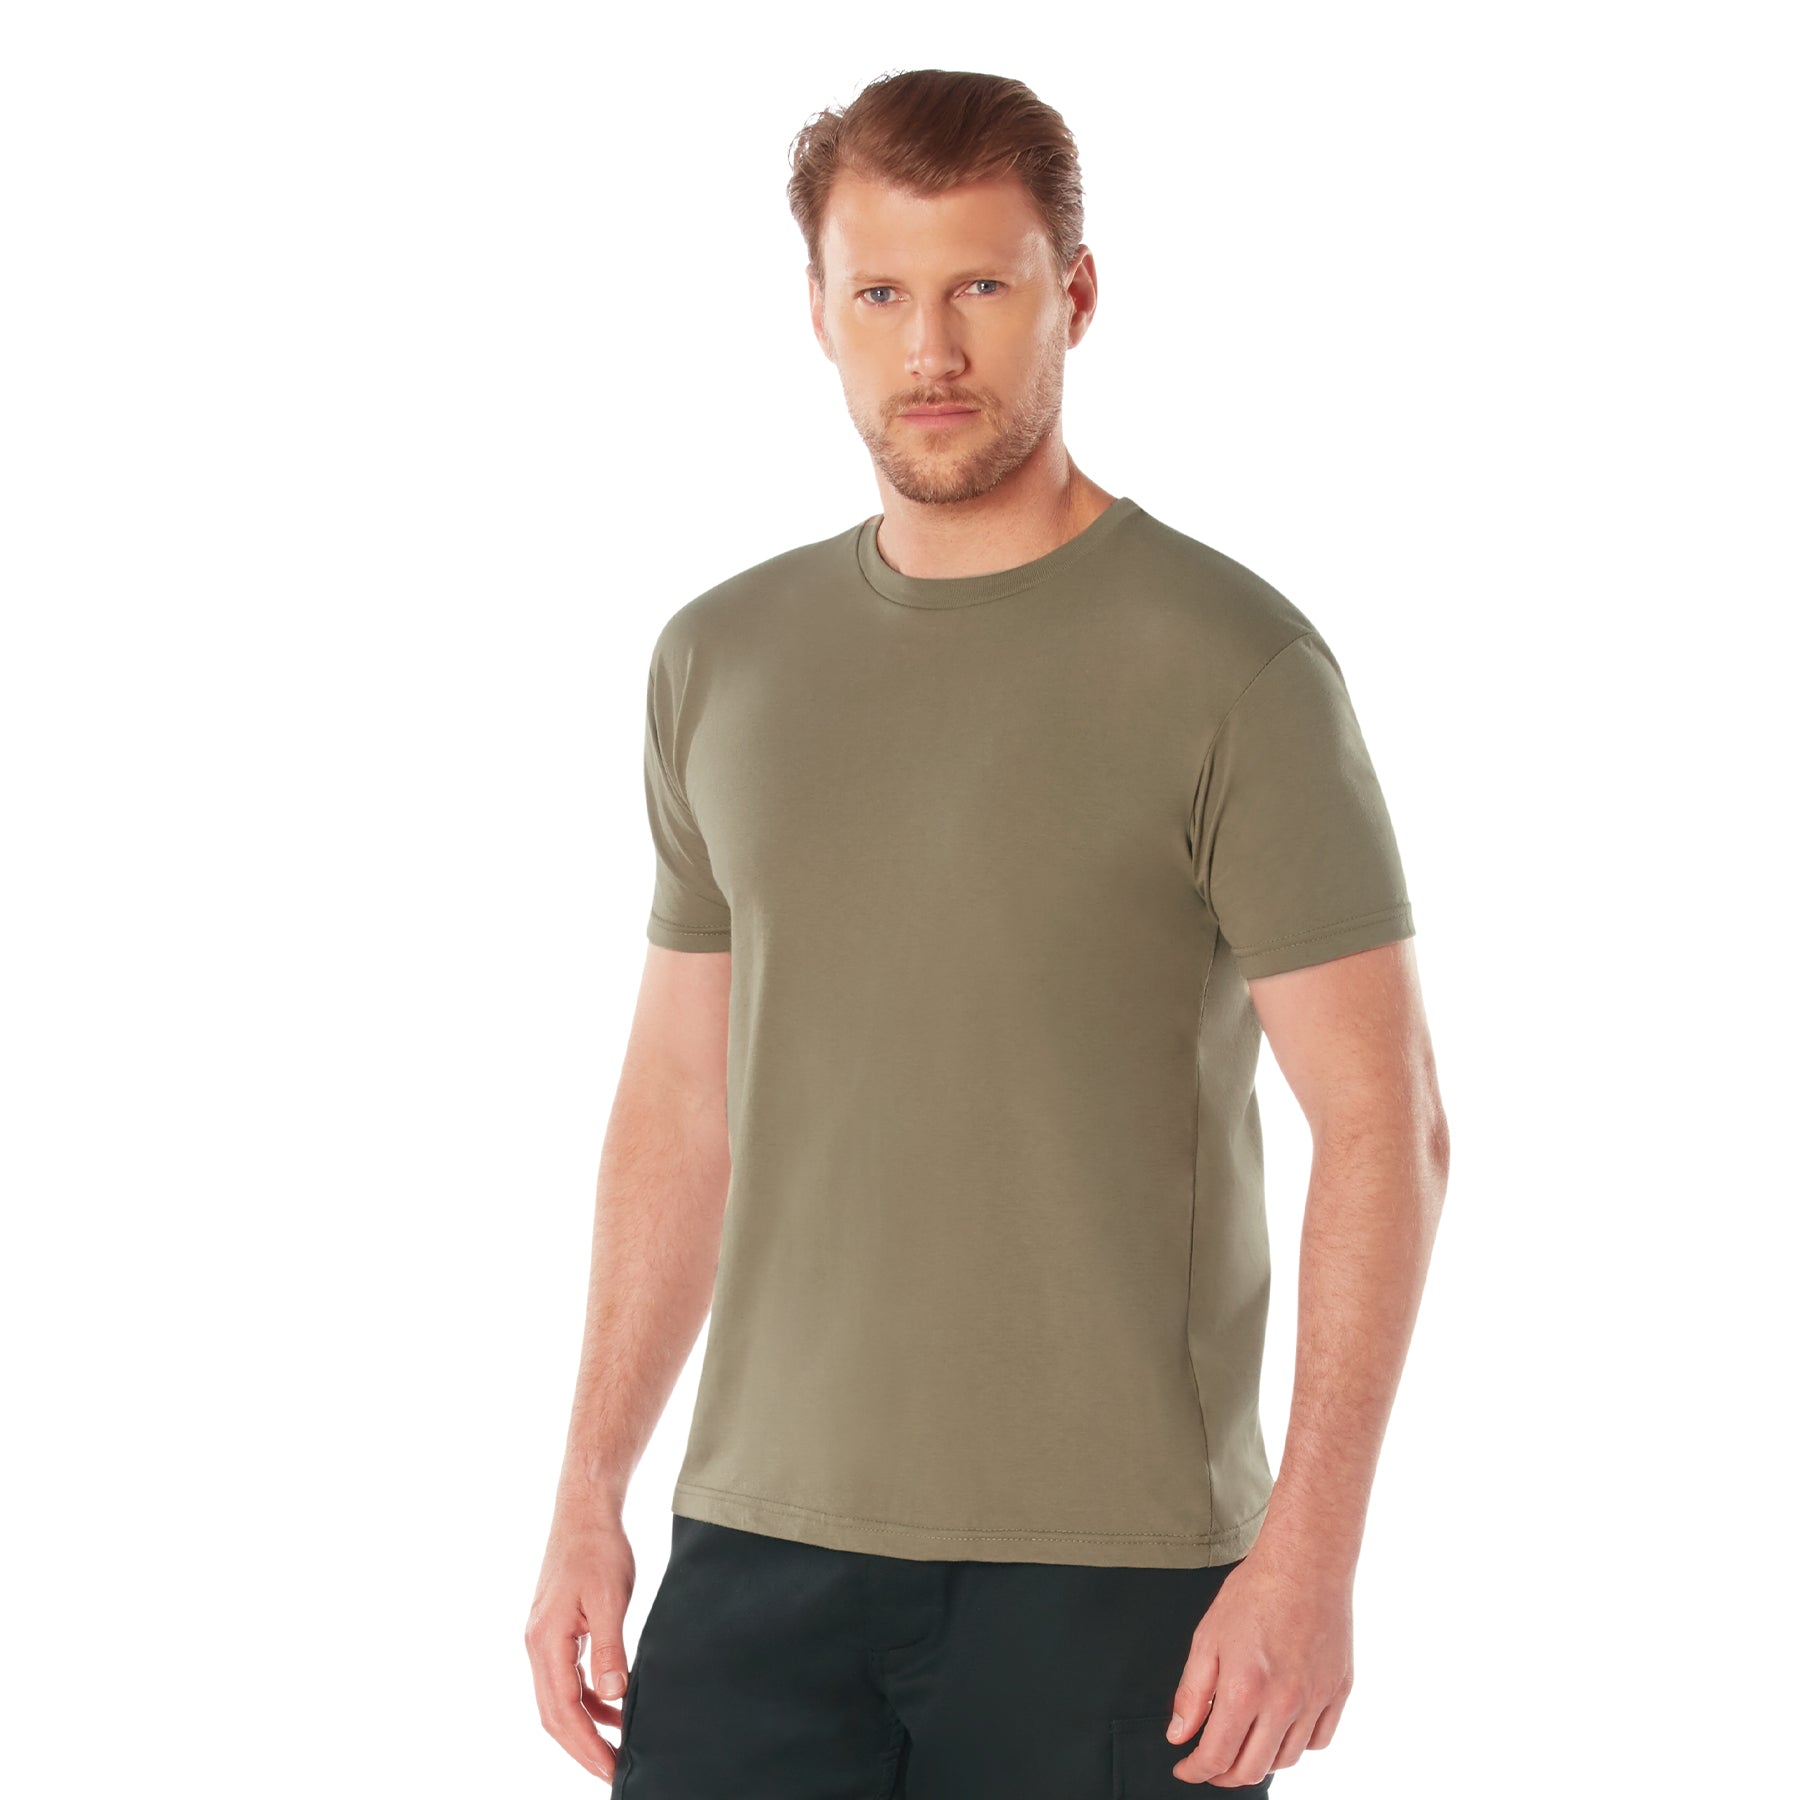 [AR 670-1] Poly/Cotton Athletic Fit T-Shirts Coyote Brown AR 670-1